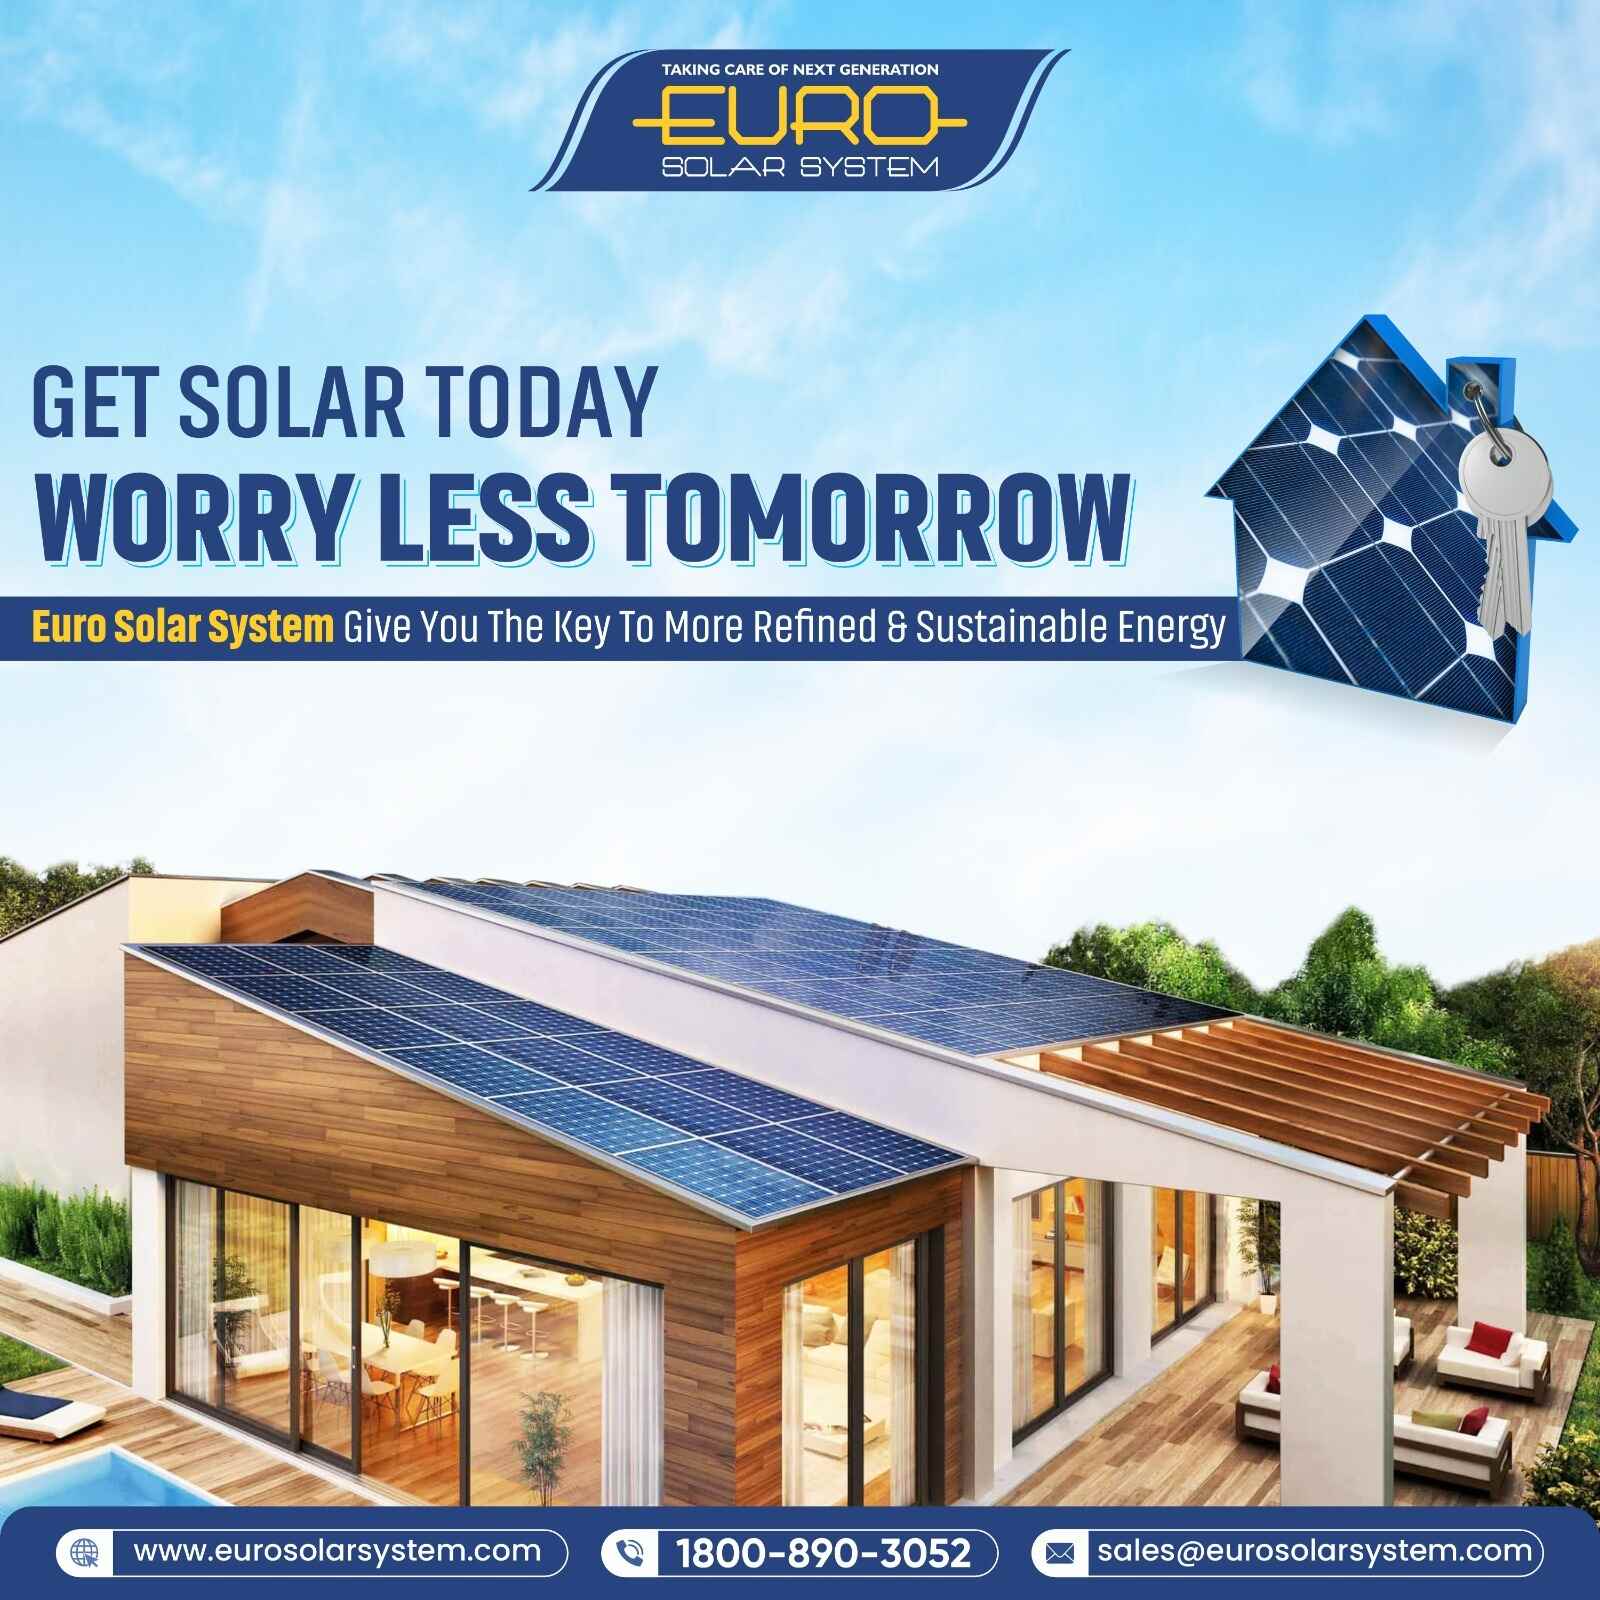 Solar system for home near Ahmedabad, GujaratServicesBusiness OffersAll Indiaother